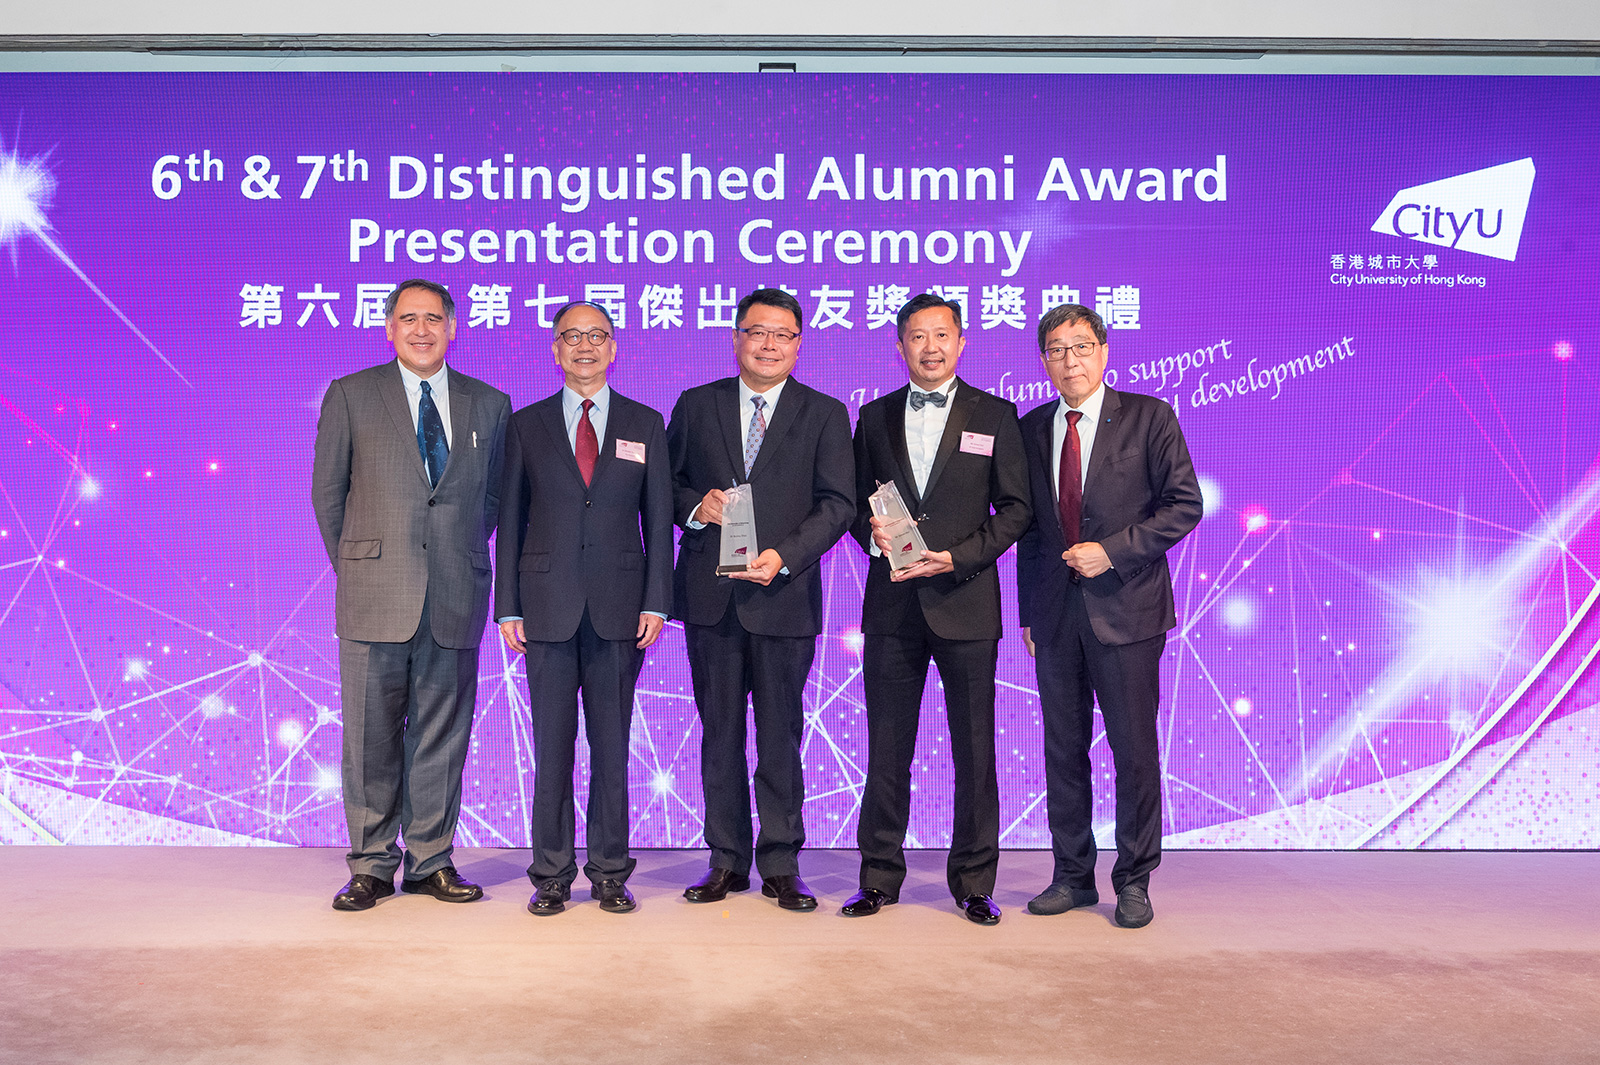 Mr Simon Hui (second from right) and Dr Sunny Chai (third from right) are conferred the 6th and 7th Distinguished Alumni Award of CityU, respectively. The ceremony was officiated by Dr Chung Shui-ming, CityU Pro-Chancellor (second from left), Mr Lester Garson Huang, CityU Council Chairman (first left), and Professor Way Kuo, CityU President (first right).